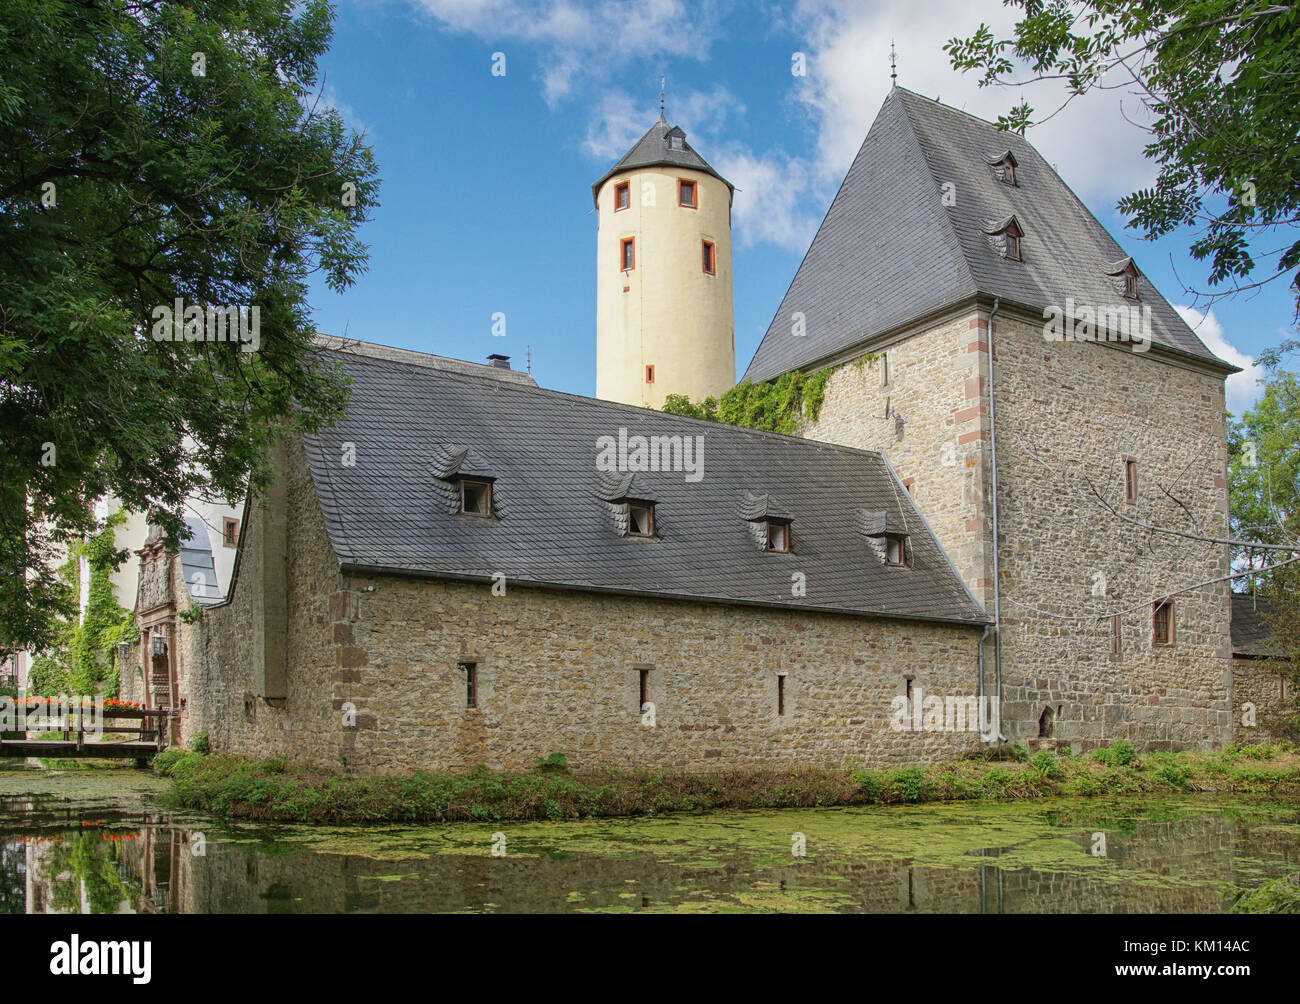 BITBURG, GERMANY - JUNE 26, 2017: Old Rittersdorf Castle close to Bitburg on June 26, 2017 in Germany, Europe Stock Photo